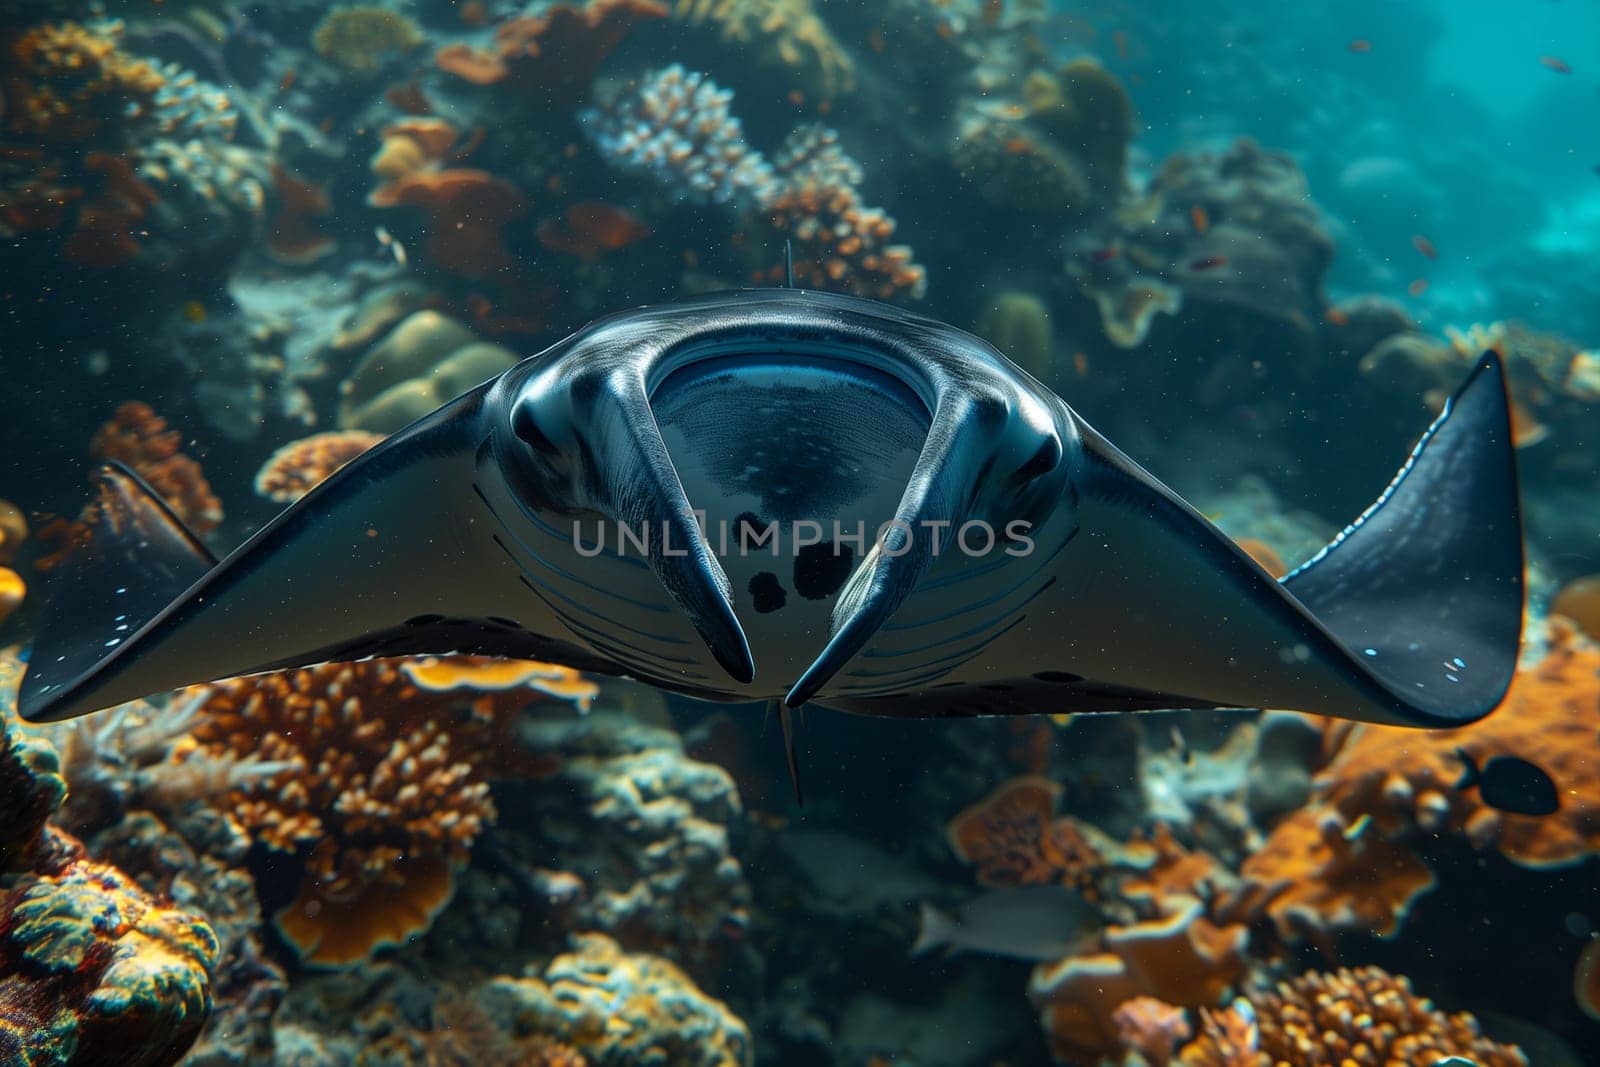 Manta ray swimming in the ocean in French Polynesia by Sd28DimoN_1976